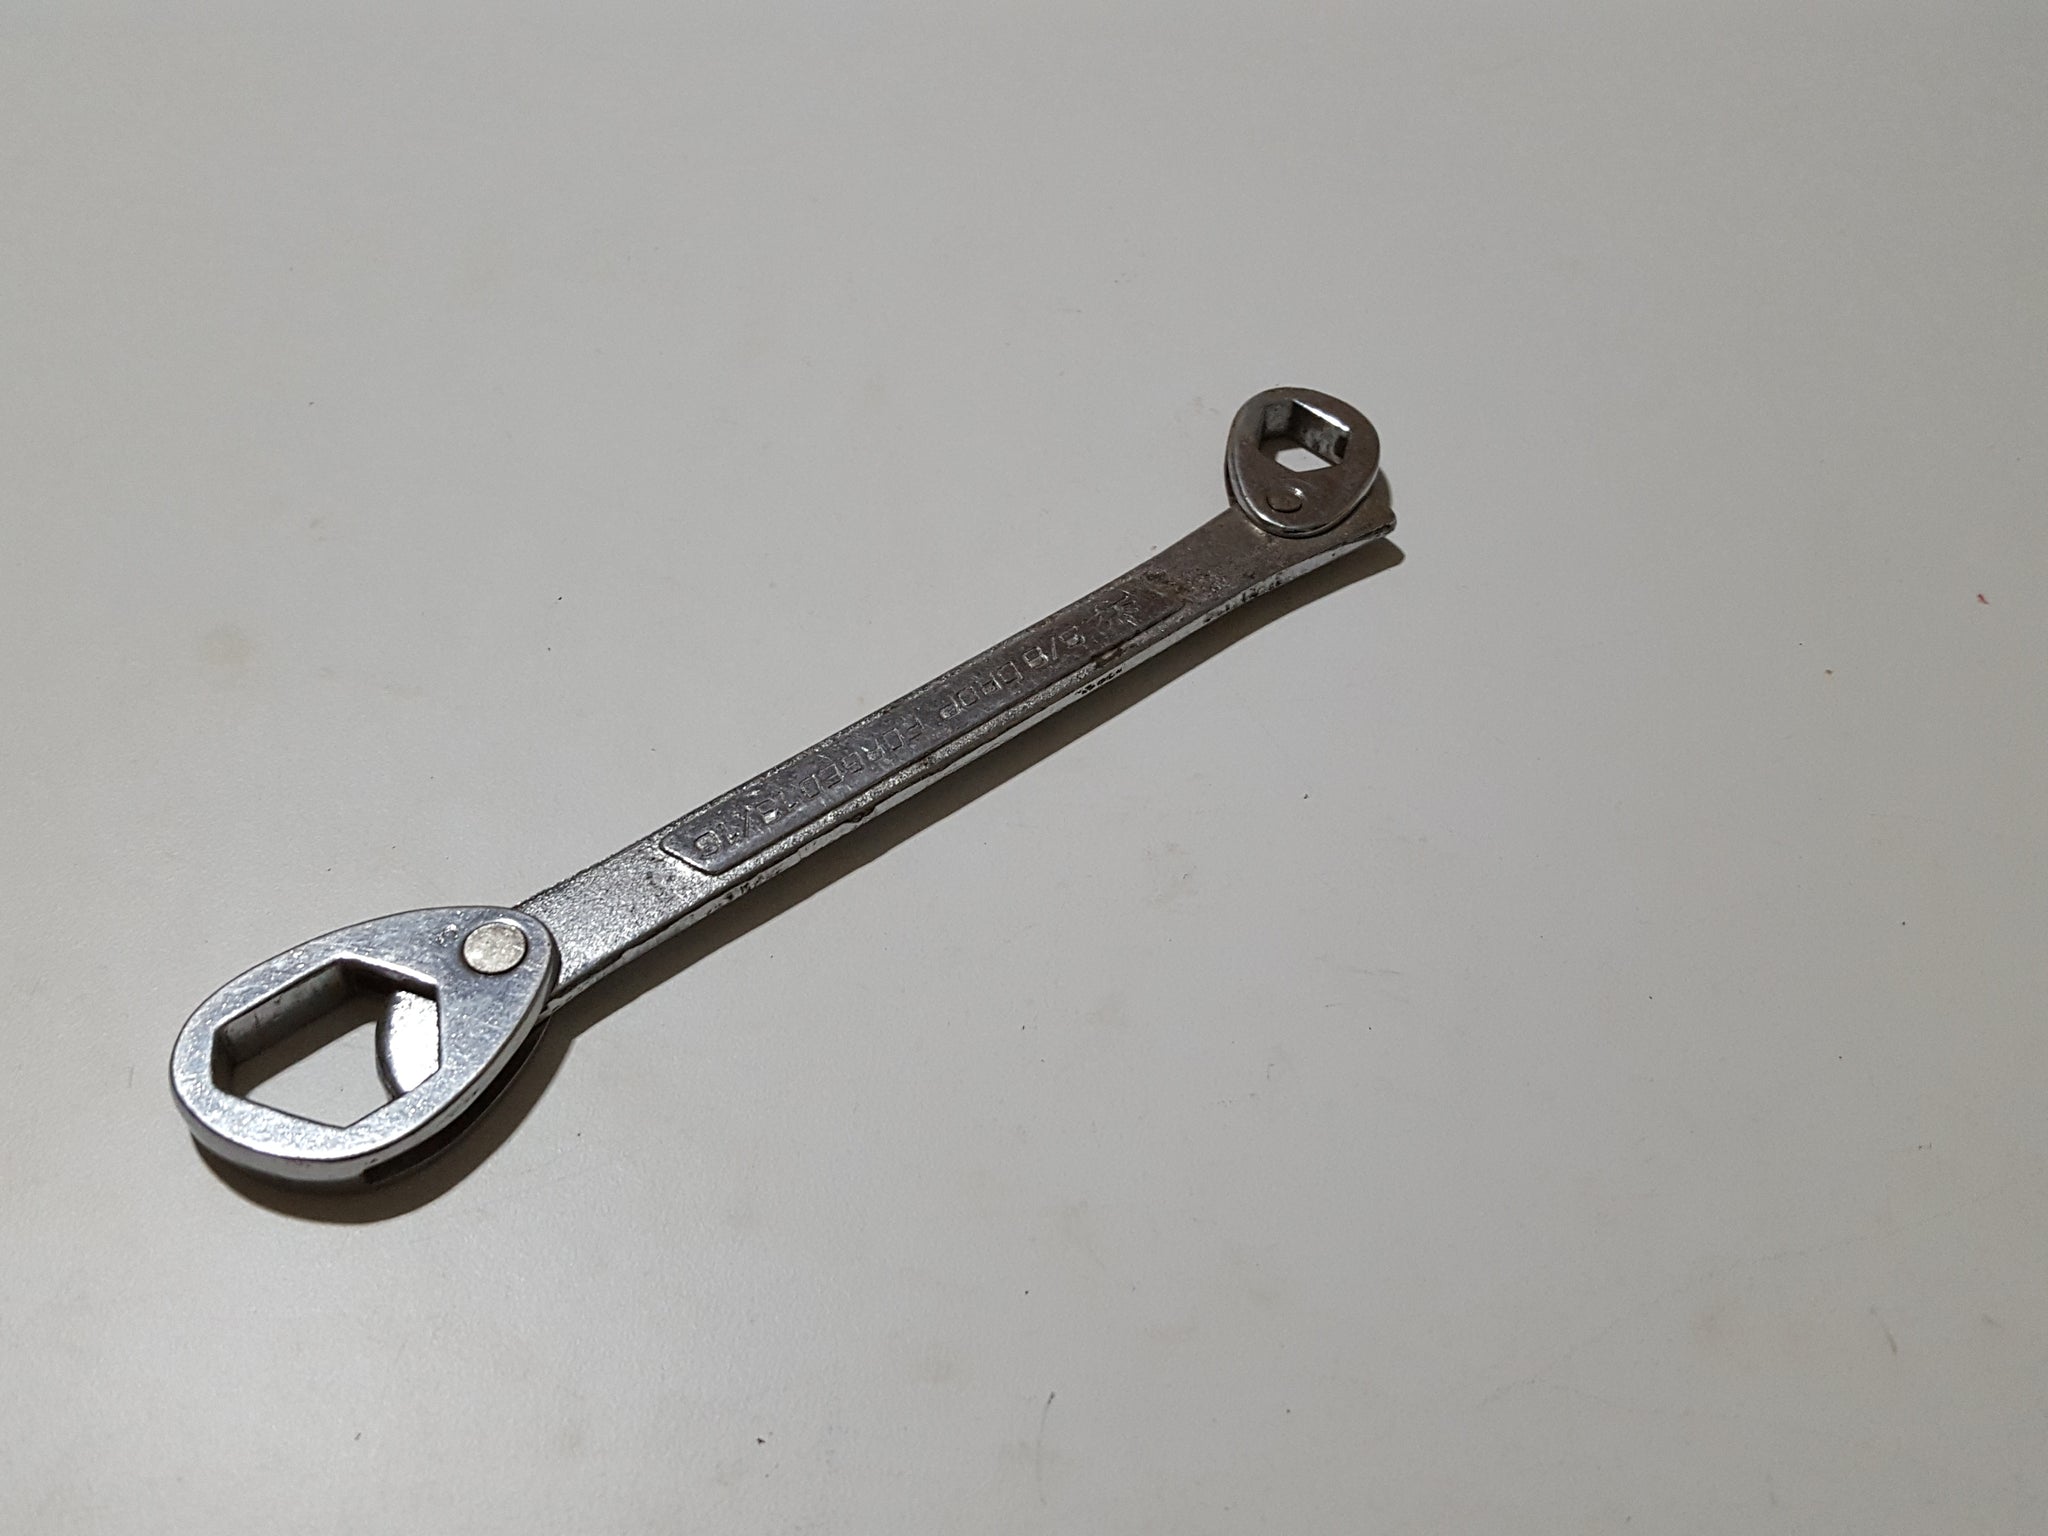 8 3/4" Vintage Multi Wrench 3/8 - 13/16" 32933